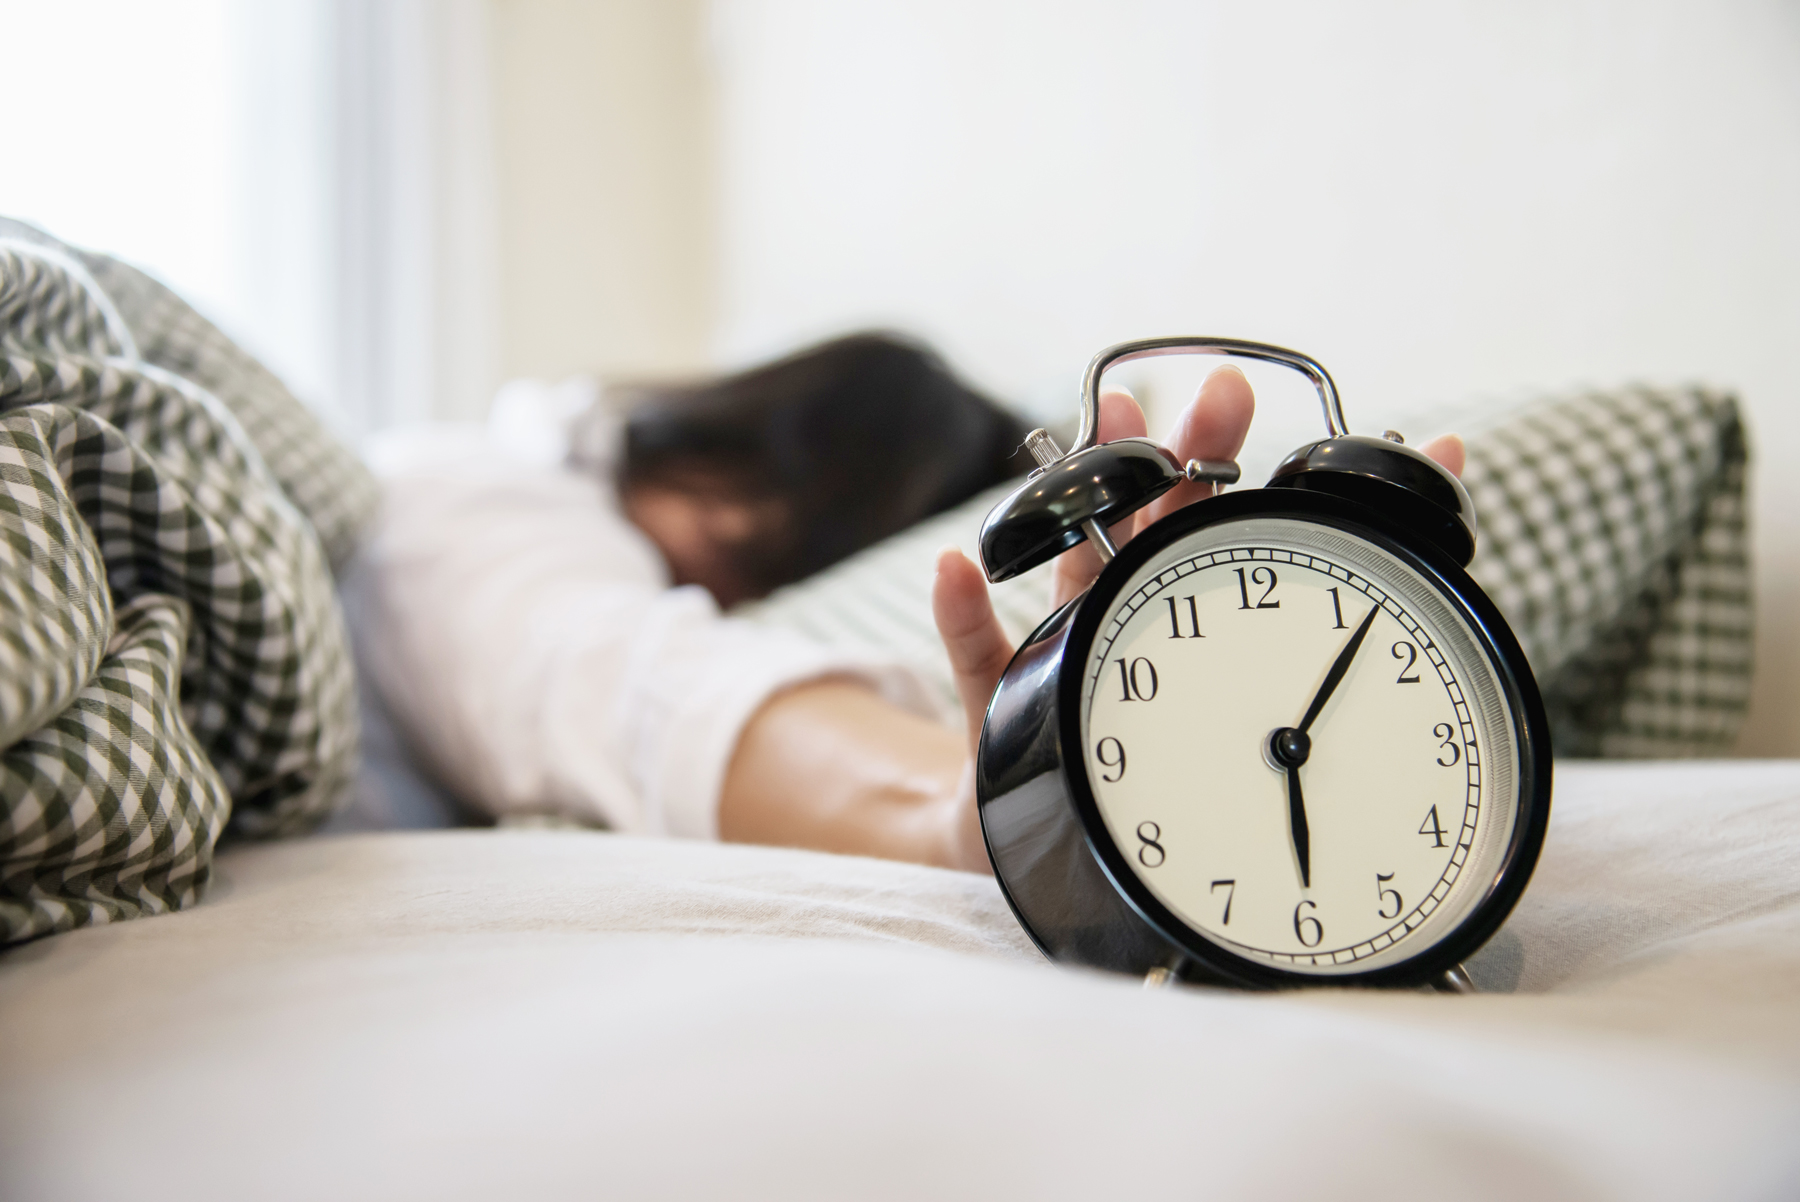 You snooze, you… gain better health?